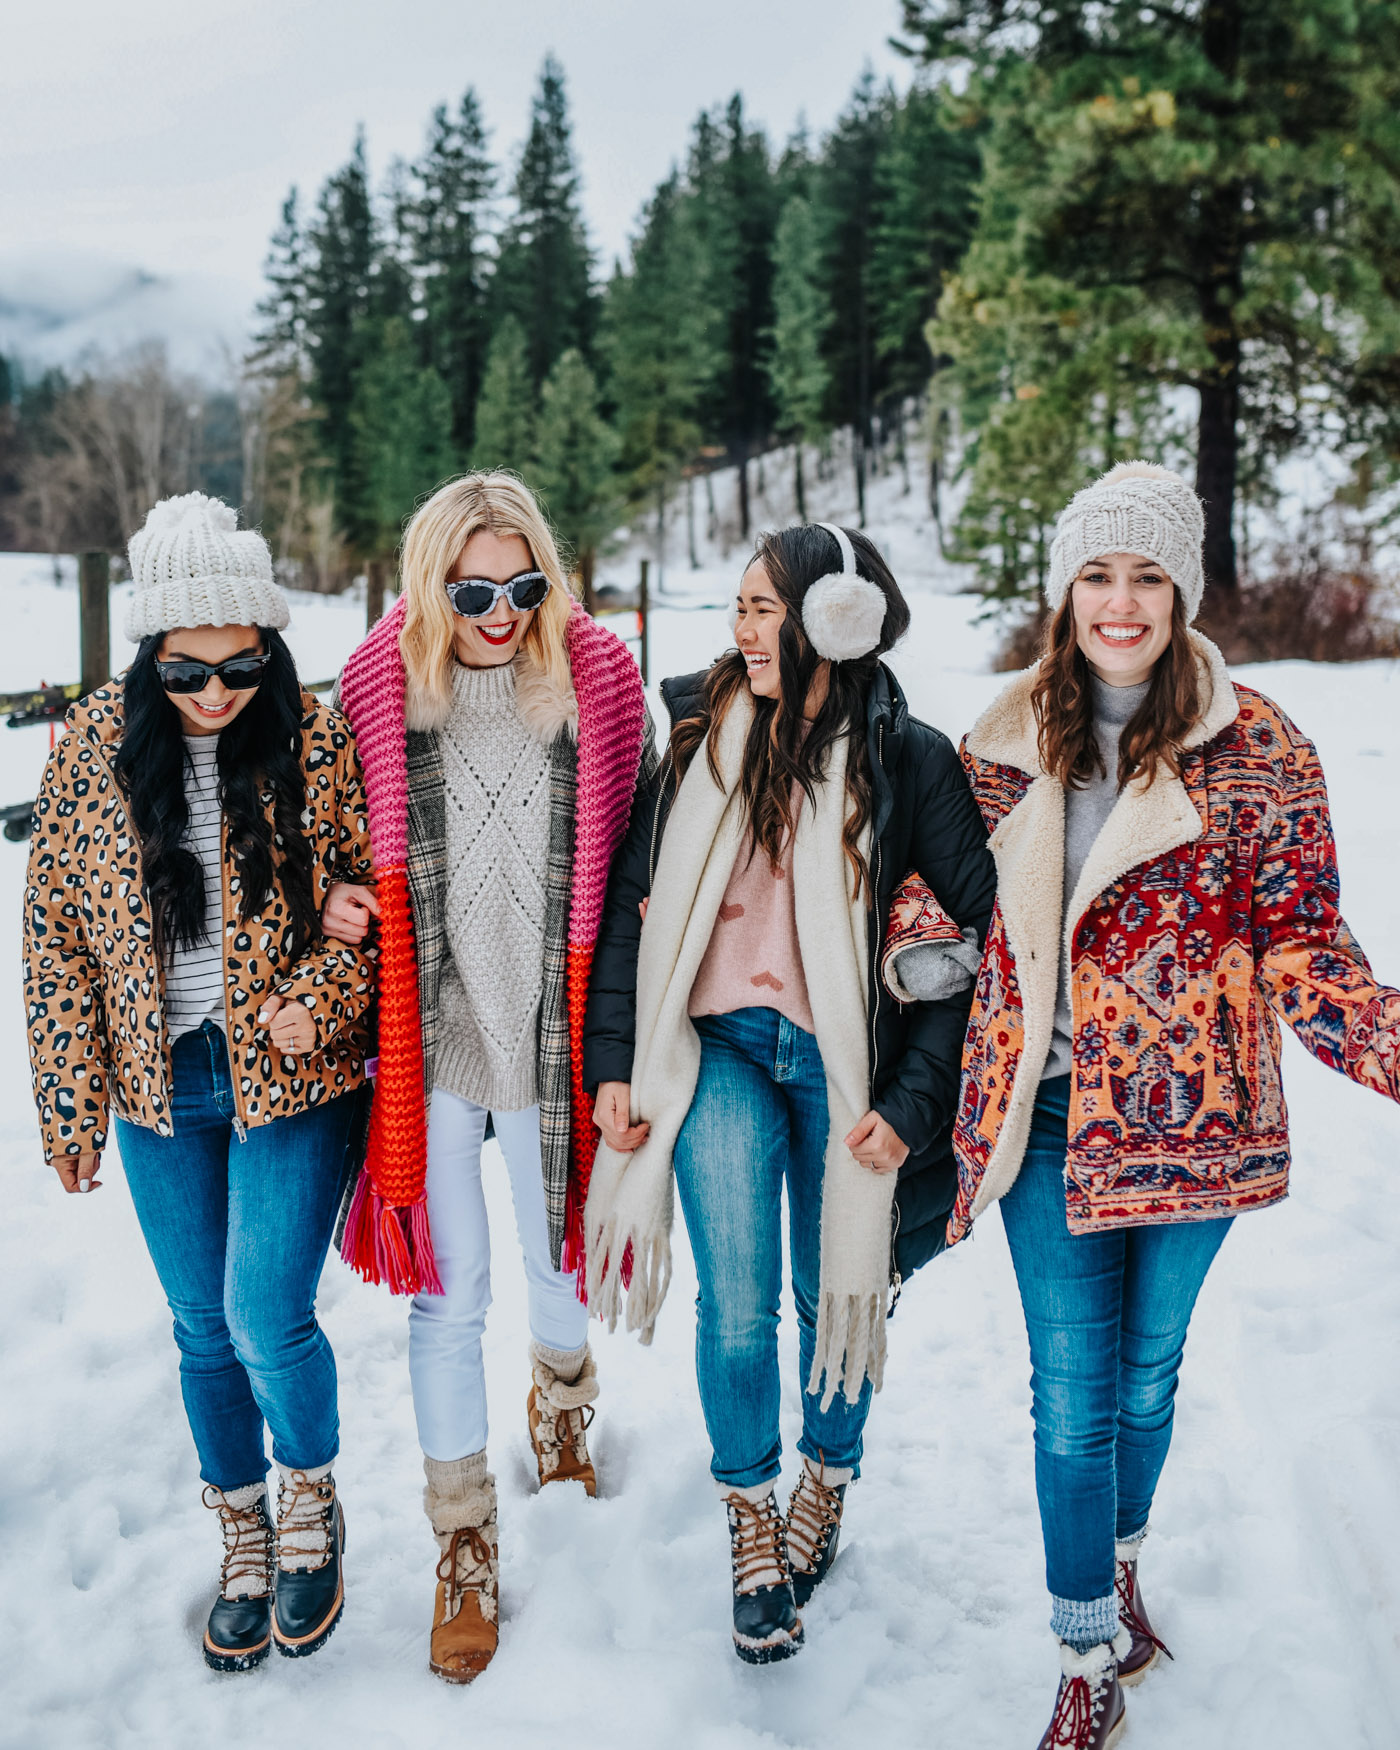 Fun Things to Do in Leavenworth WA in the Winter: a Complete Weekend Travel Guide featured by top US travel blog, Lone Star Looking Glass.